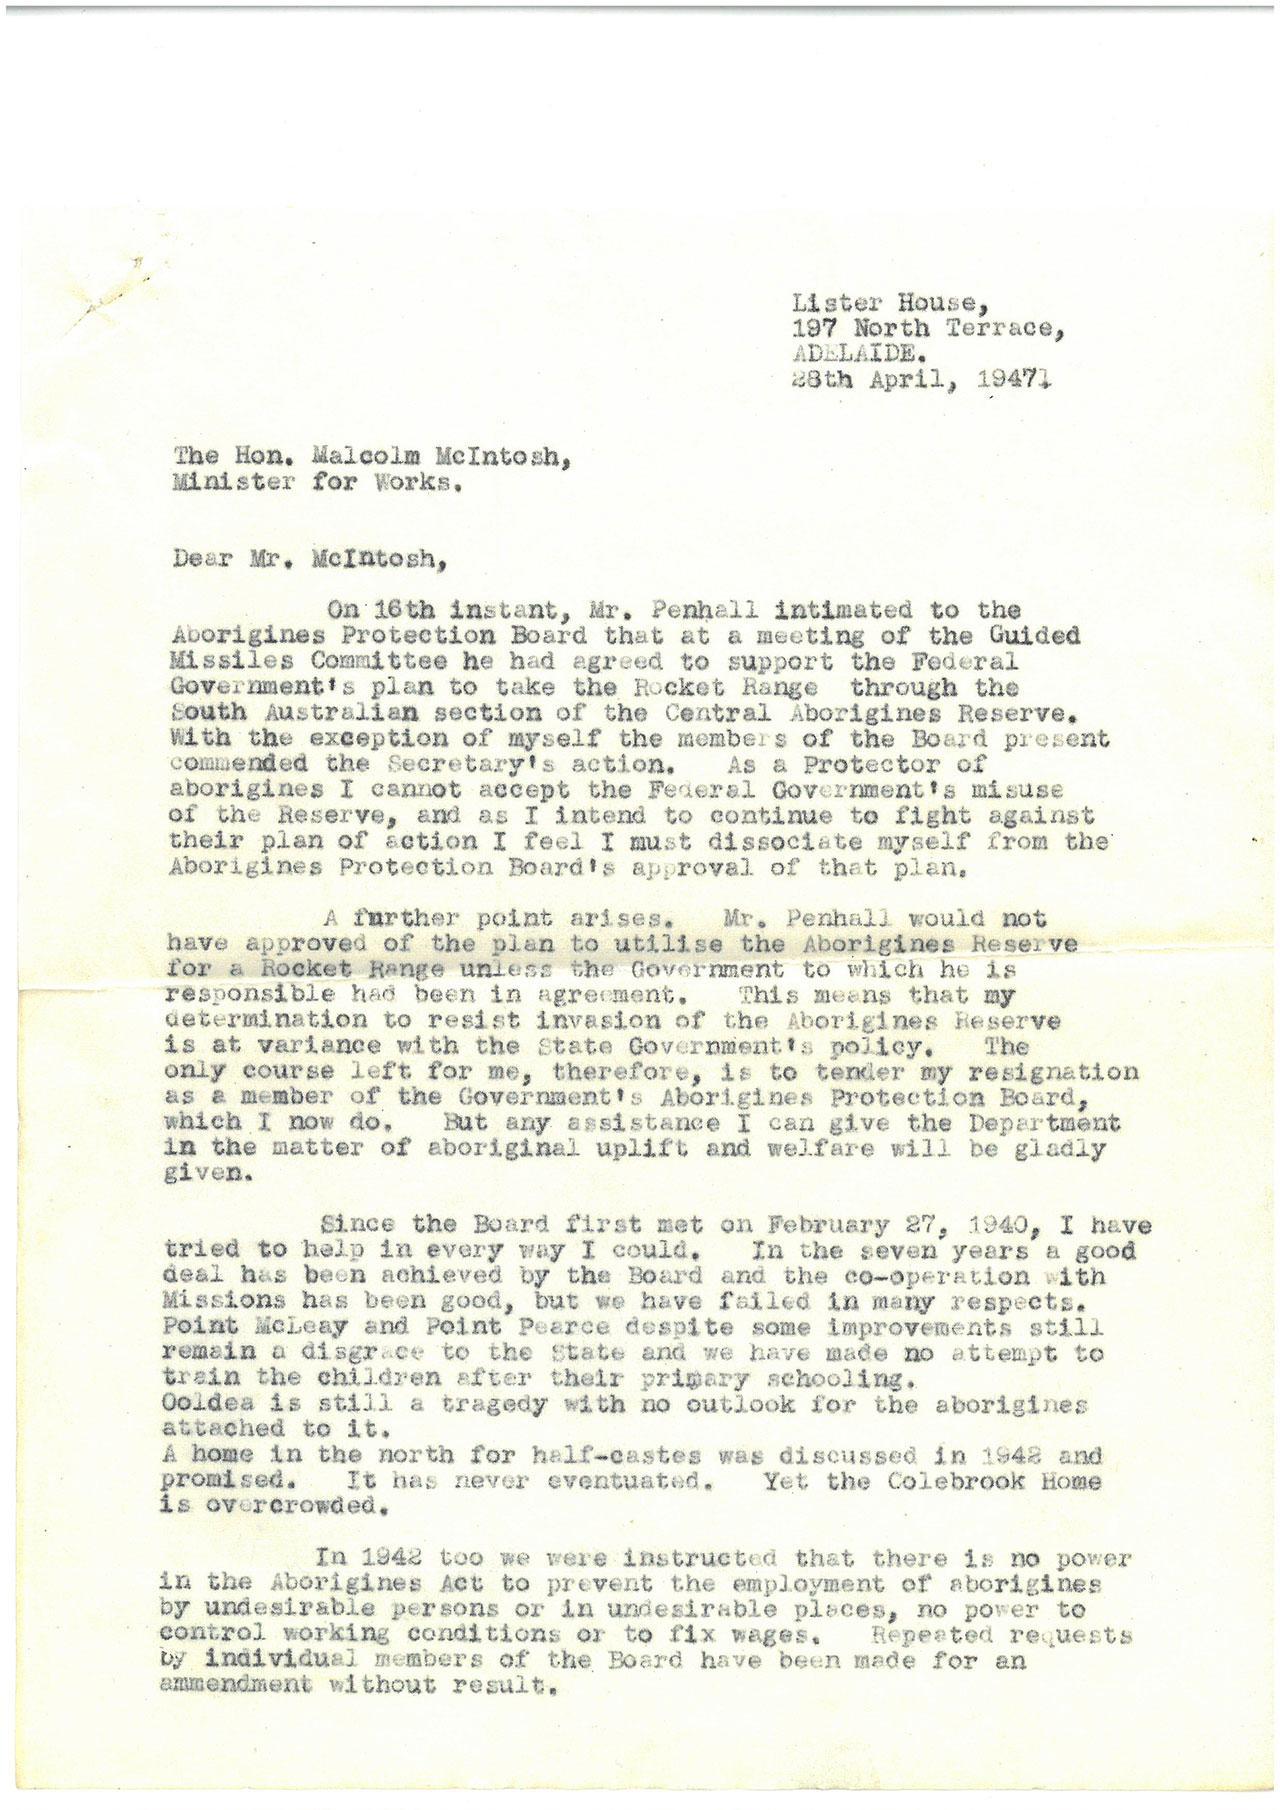 Letter written by Charles Duguid to Malcolm McIntosh, page 1. SLSA PRG/387/2